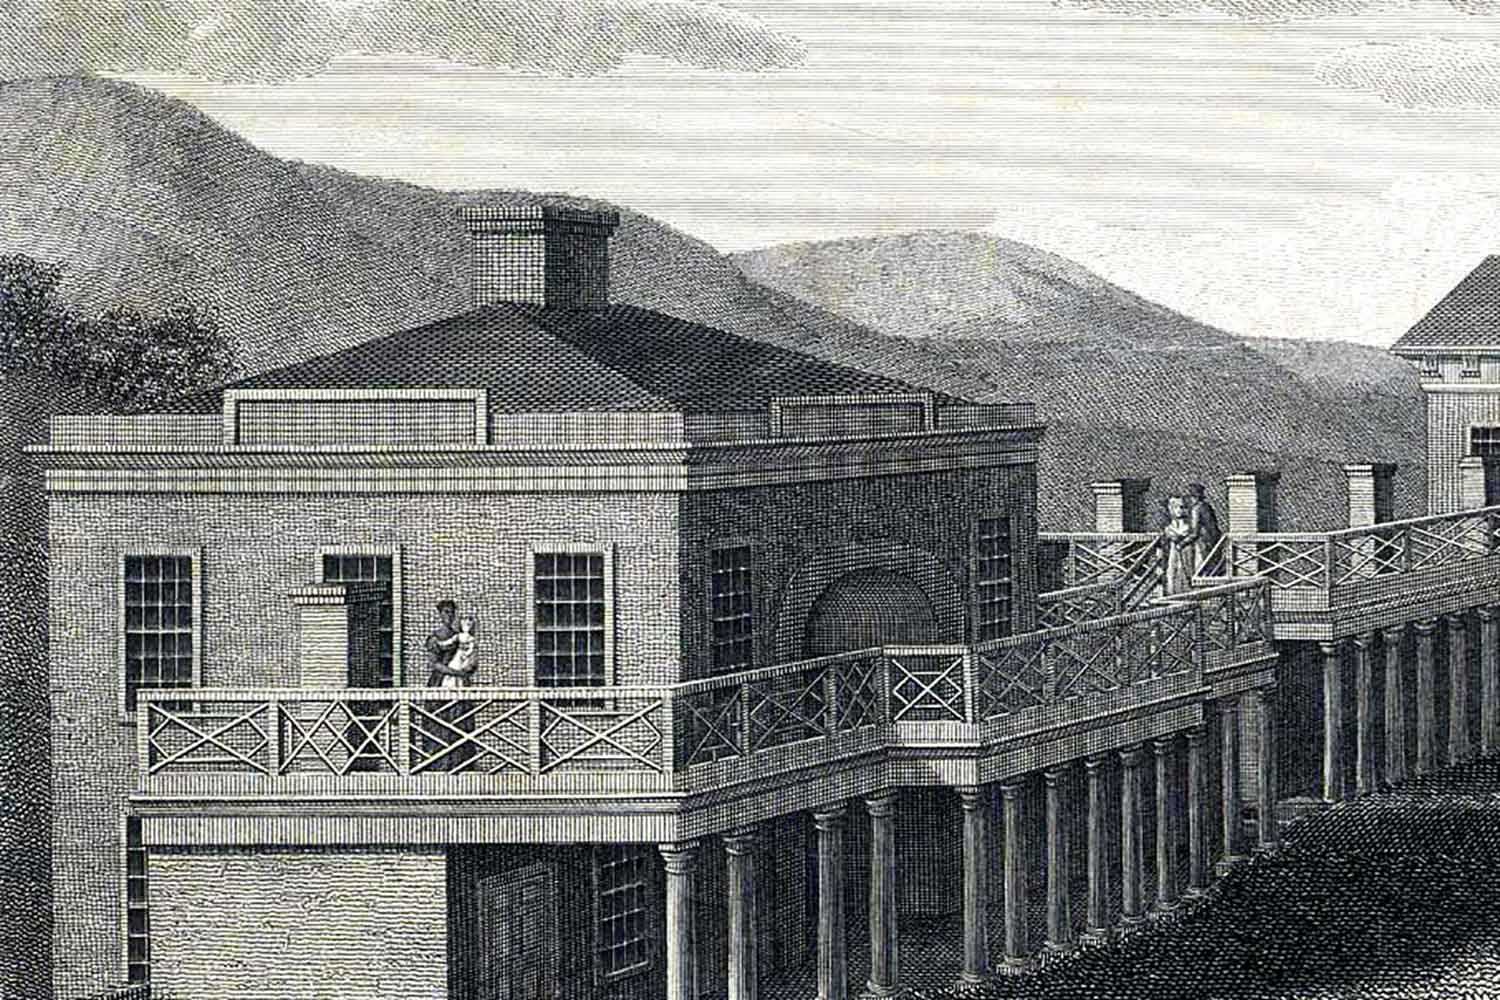 Detail drawing of the Lawn buildings with slaves on the upper balconies. 